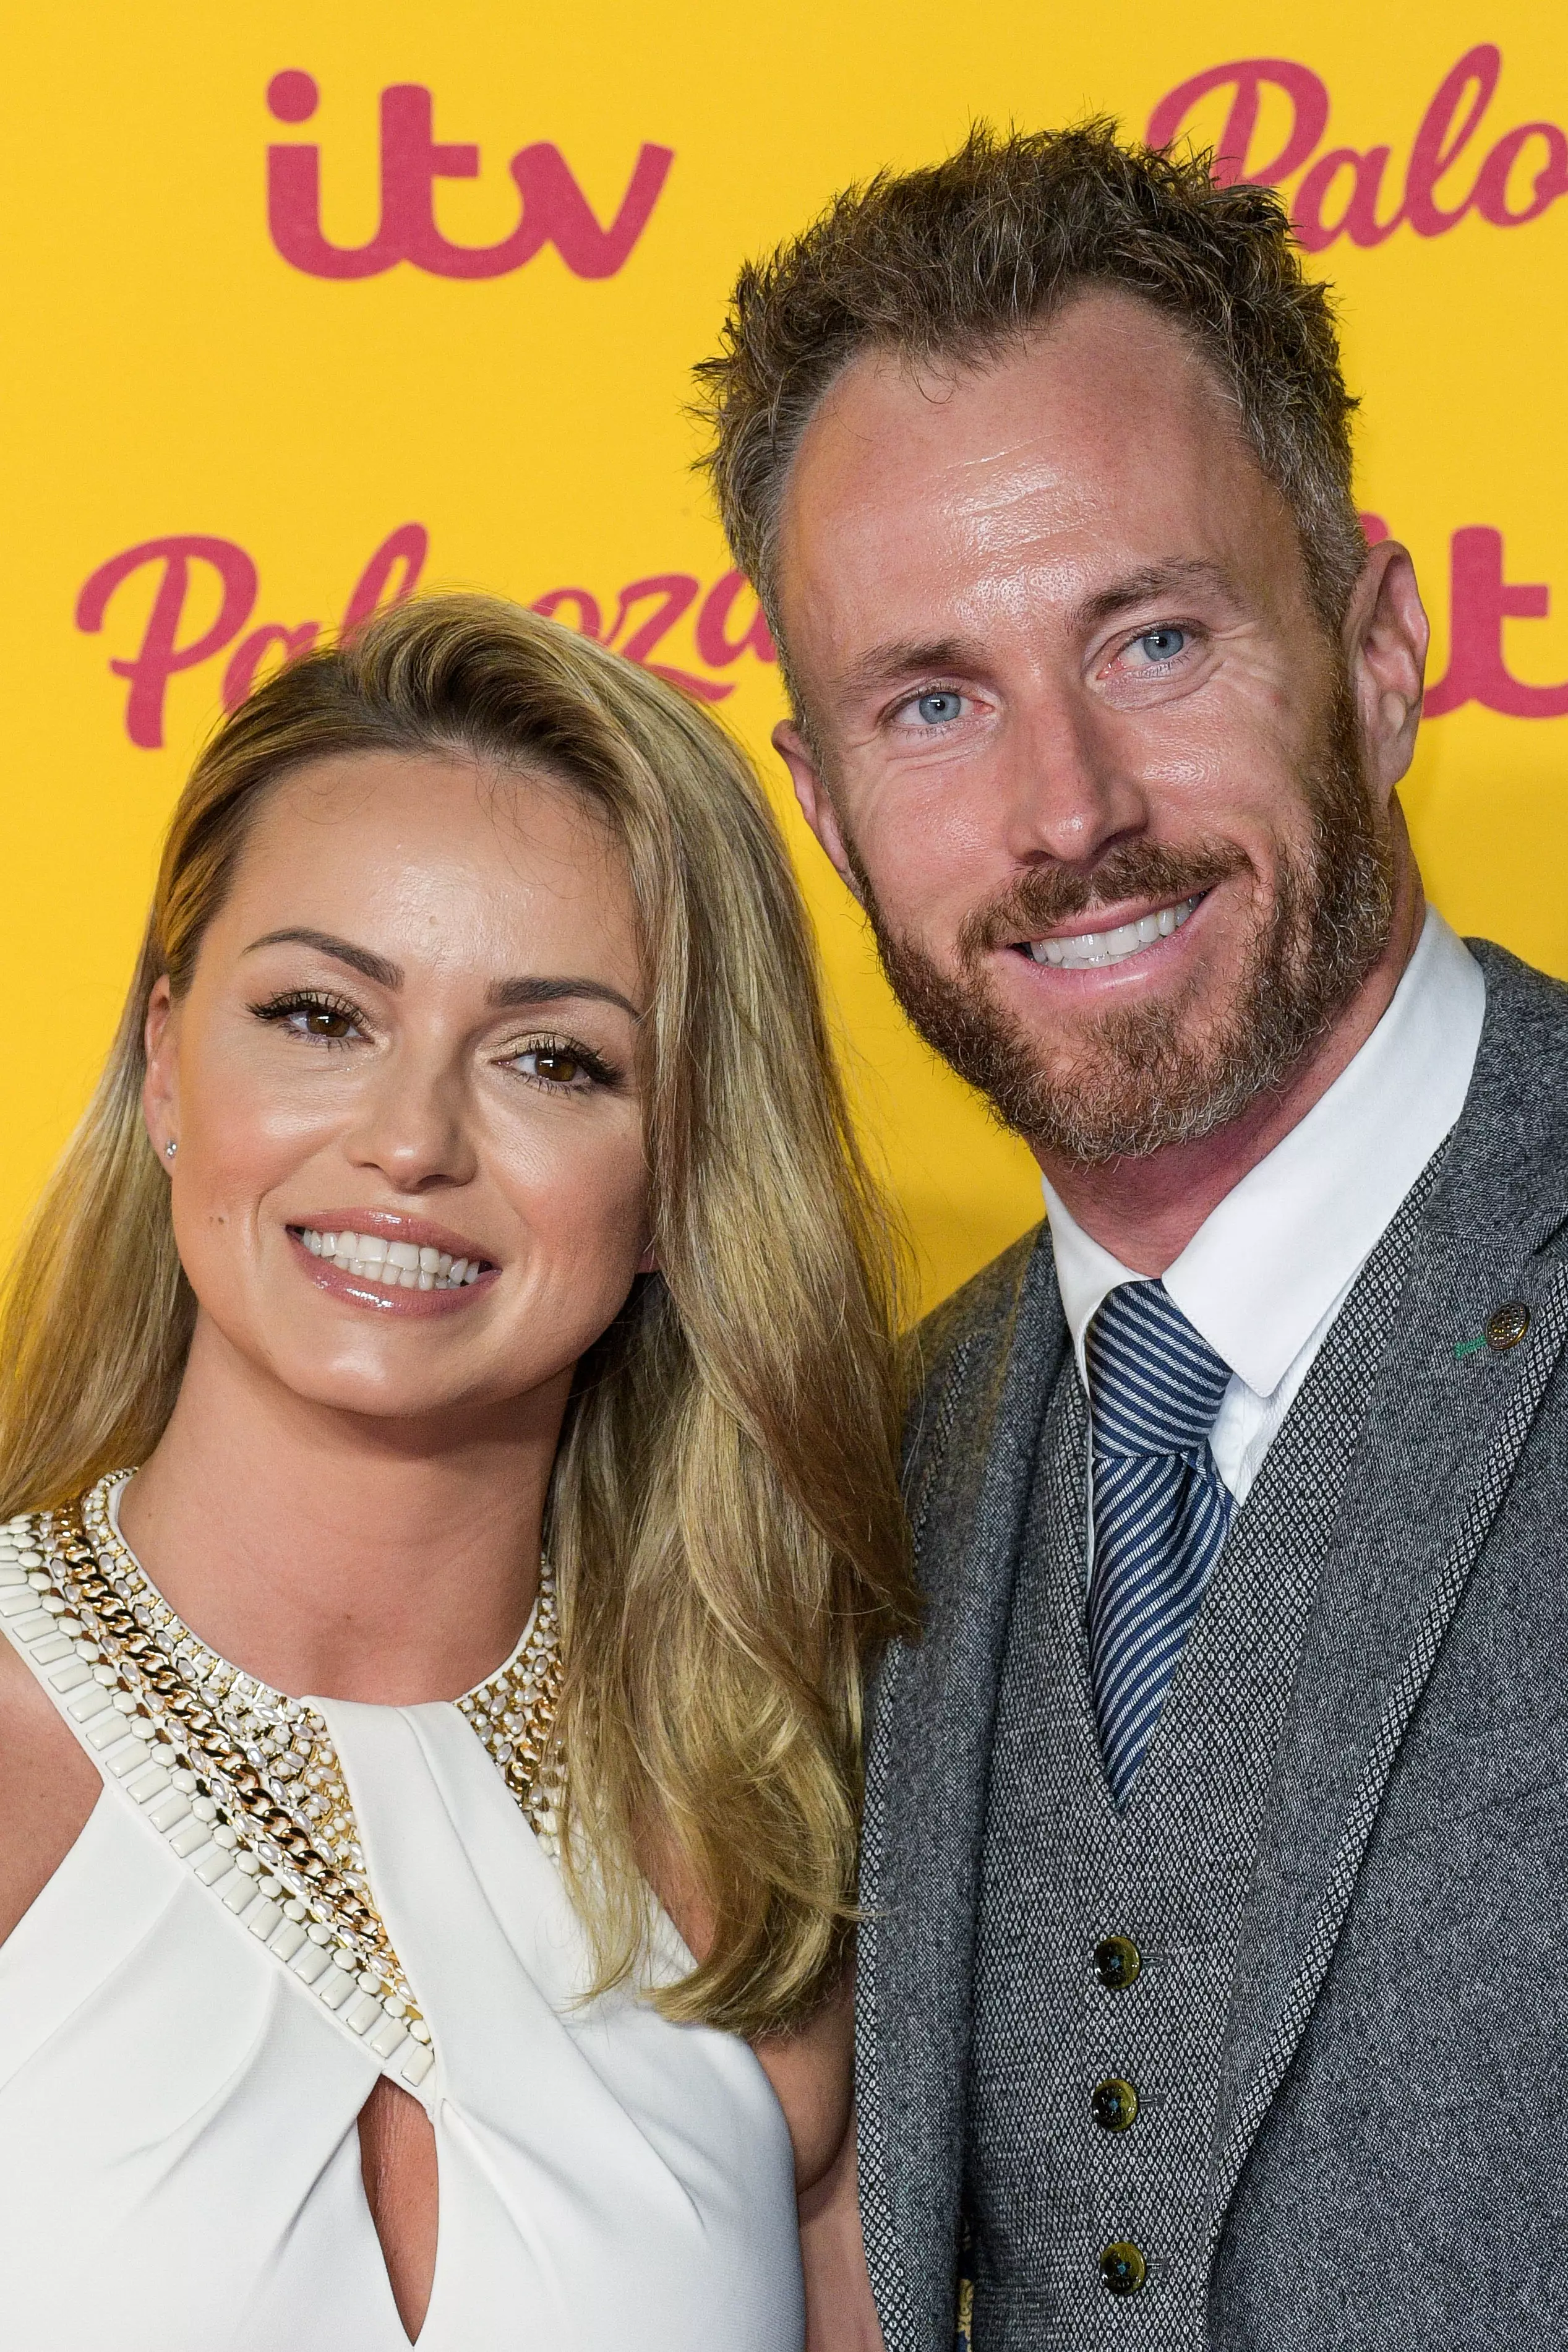 The Strictly Come Dancing couple went through IVF to have a child